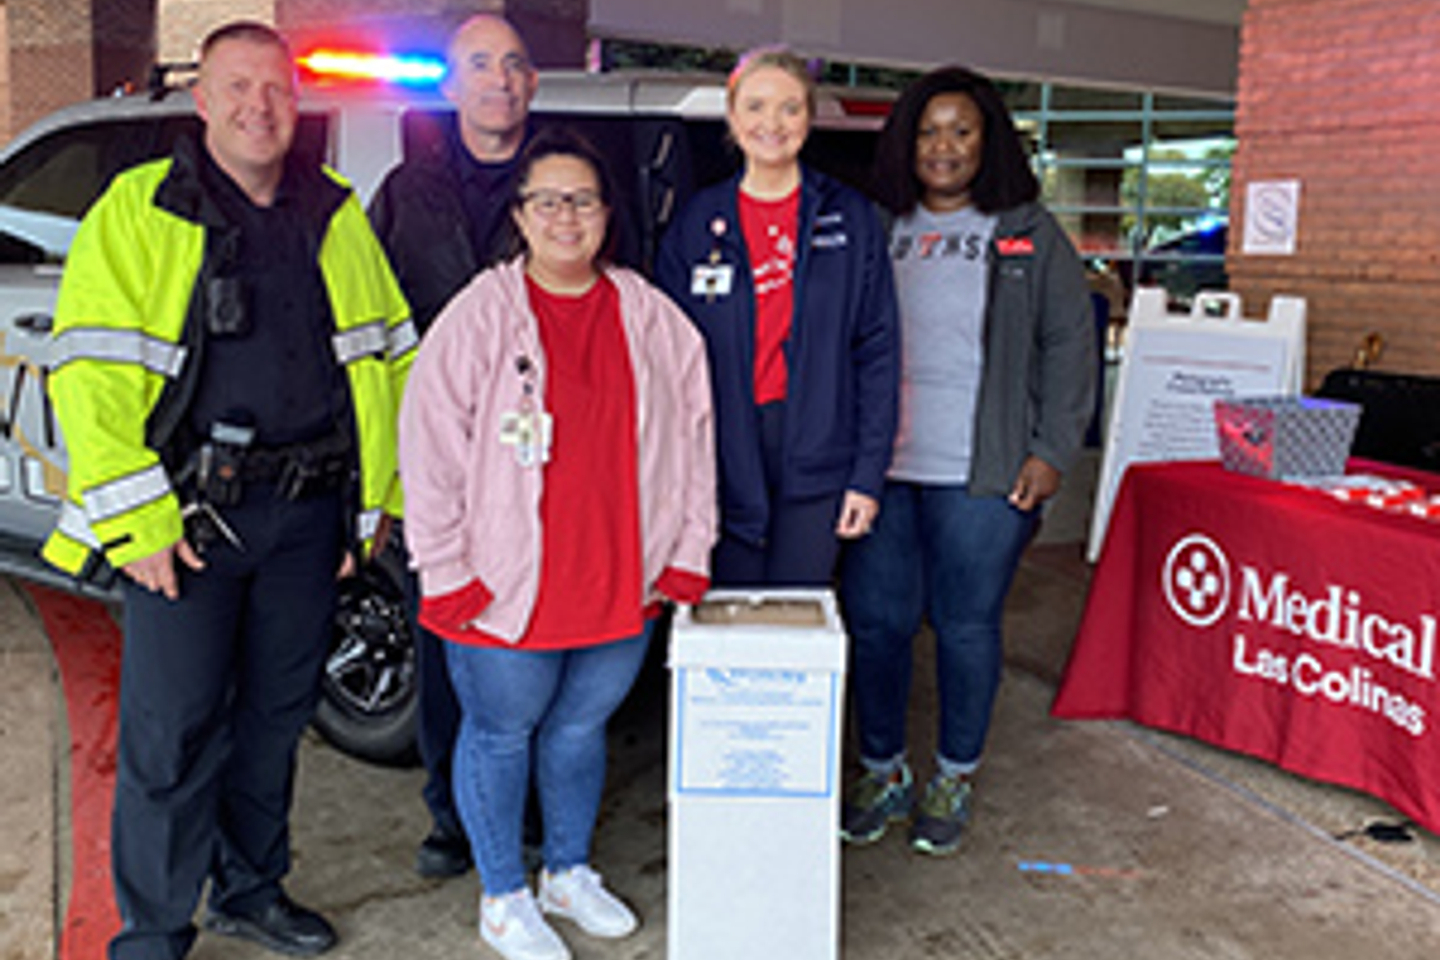 Hospital staff and police officers smile while standing next to a medication drop box.